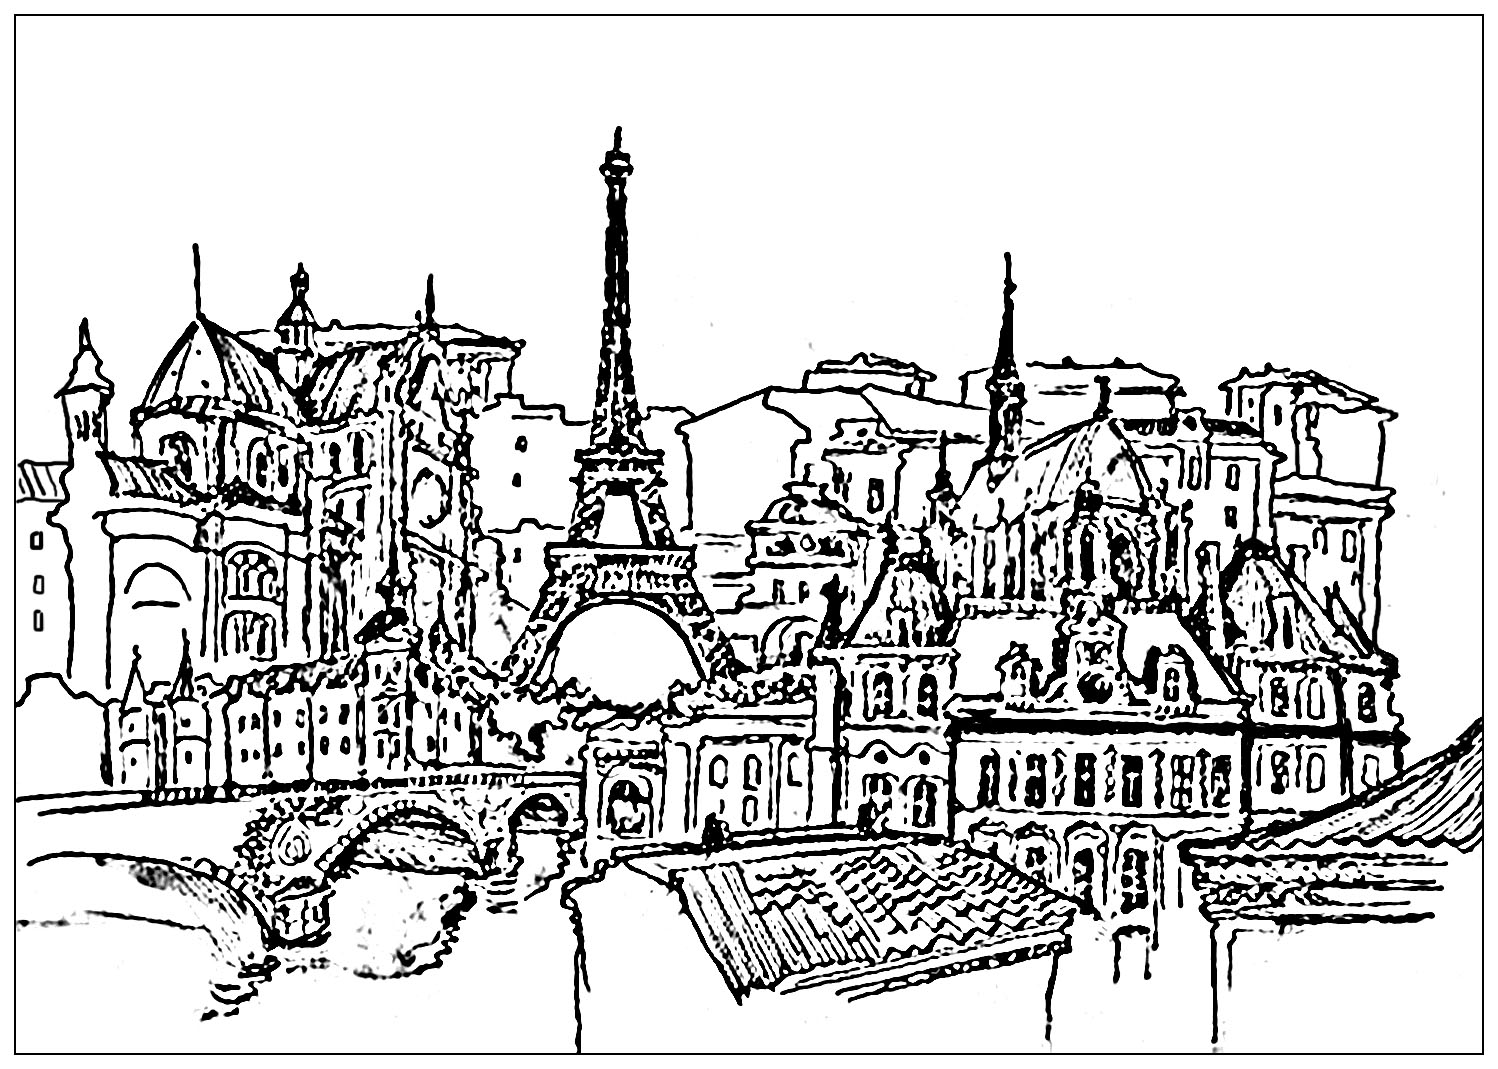 A very complex coloring page of Paris